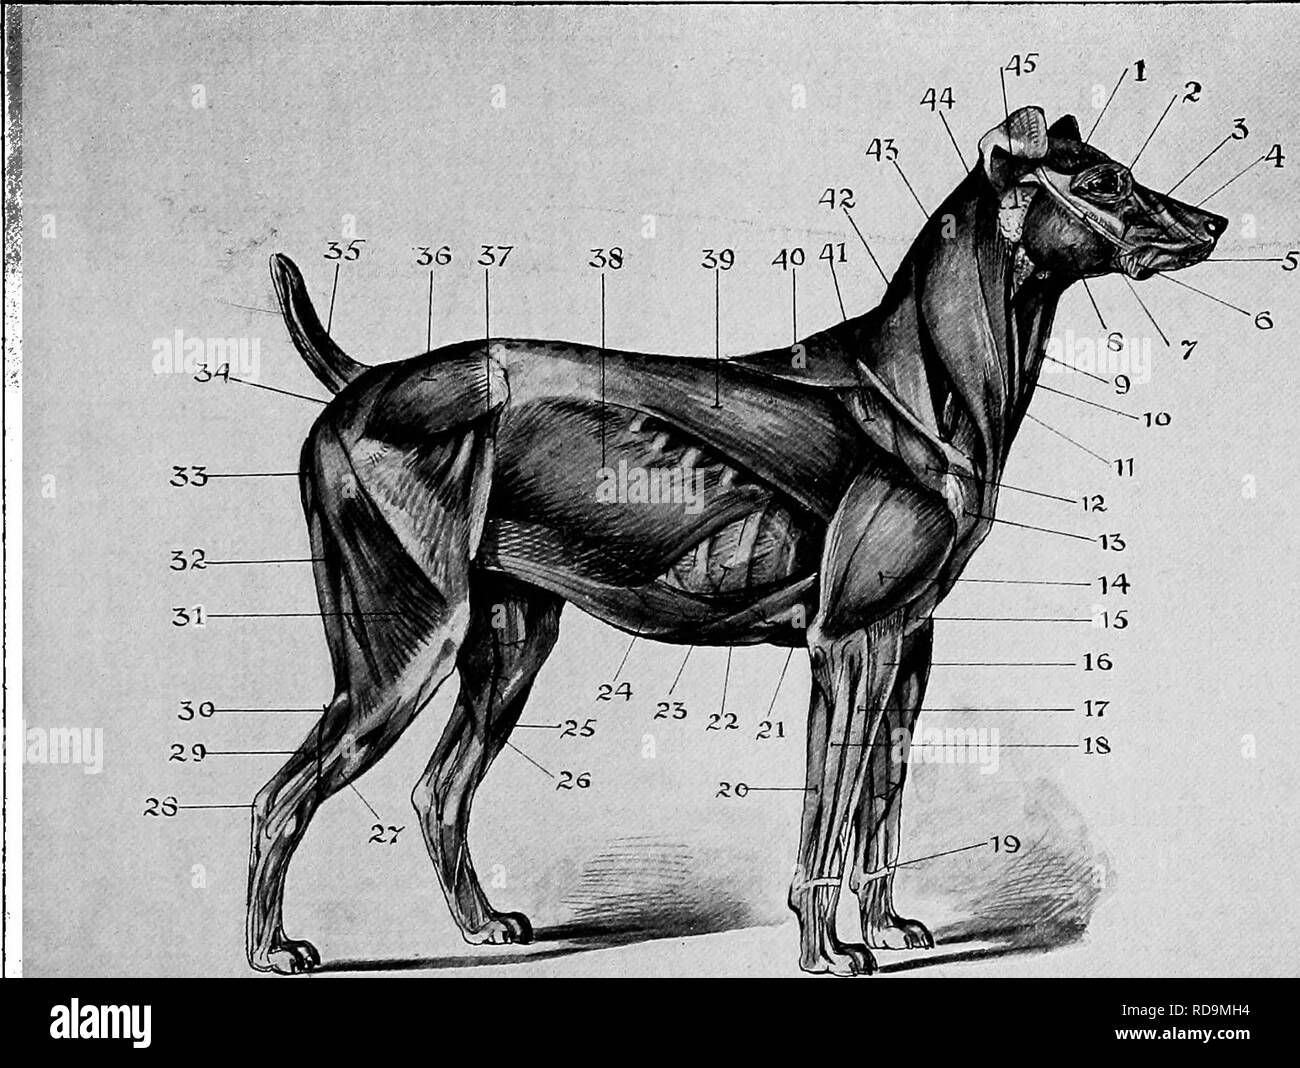 . The new book of the dog; a comprehensive natural history of British dogs and their foreign relatives, with chapters on law, breeding, kennel management, and veterinary treatment. Dogs. 595. Iv^-g^^&quot;- .--?; â ^,:Jf.yv^tX^^.:jr^-;: THE PRINCIPAL SUPERFICIAL MUSCLES OF A DOG. I. Temporalis or temporal muscle. 23- 2. Orbicularis palpebrarum. 24. 3- Levator labi superioris. 25- 4- Dilator naris. 26. 5- Orbicularis oris. 27. 6. Buccinator. 28. 7- Lygomaticus. 29. 8. Masseter. 30. 9- Sterno hyoidrus. 31- 10. Sterno maxillaris. 32- II. Jugular vein. 33- 12. Scapular deltoid. 34- 13- Acromion de Stock Photo